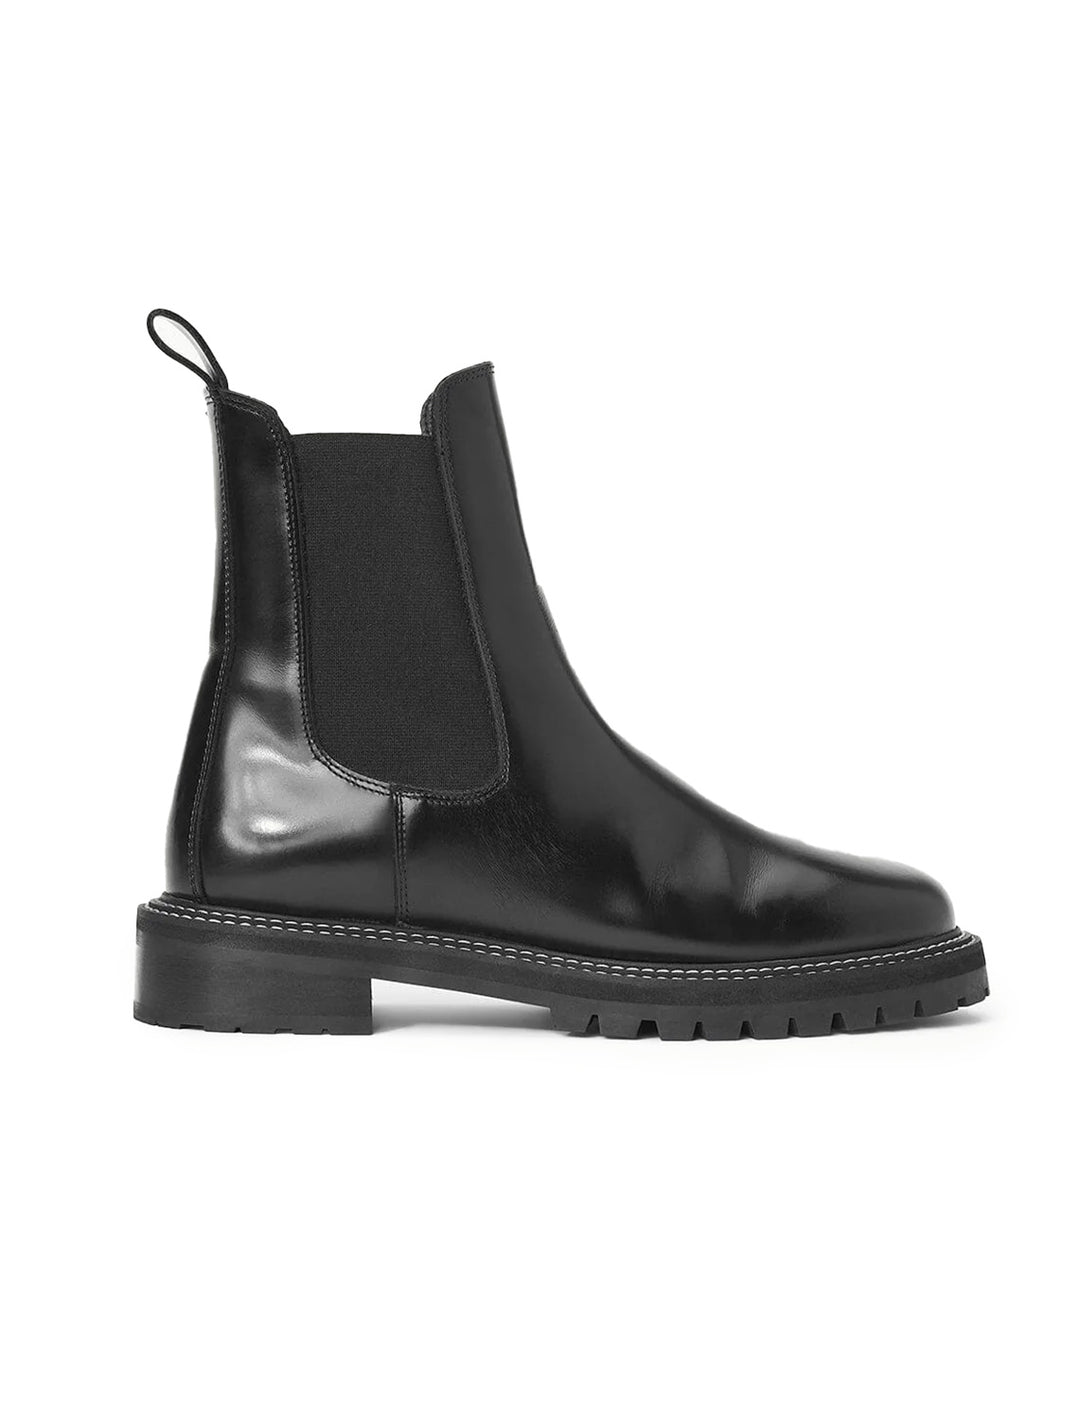 Side view of Staud's dutch boot in black.